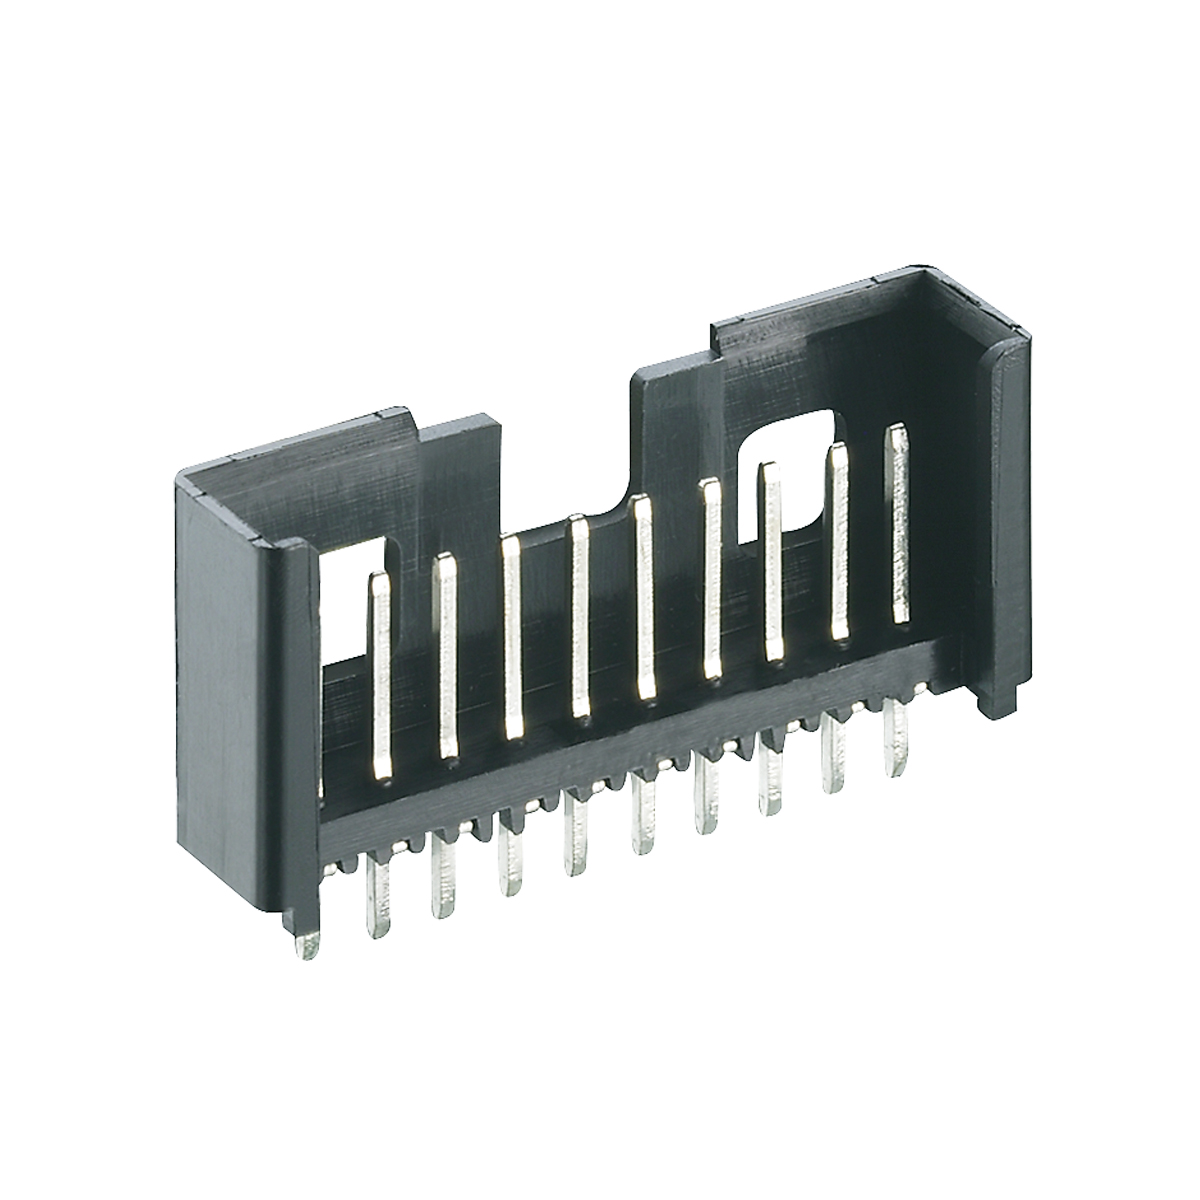 Lumberg: 2,5 MSF/O (Series 31 | Minimodul™ connectors, pitch 2.5 mm)